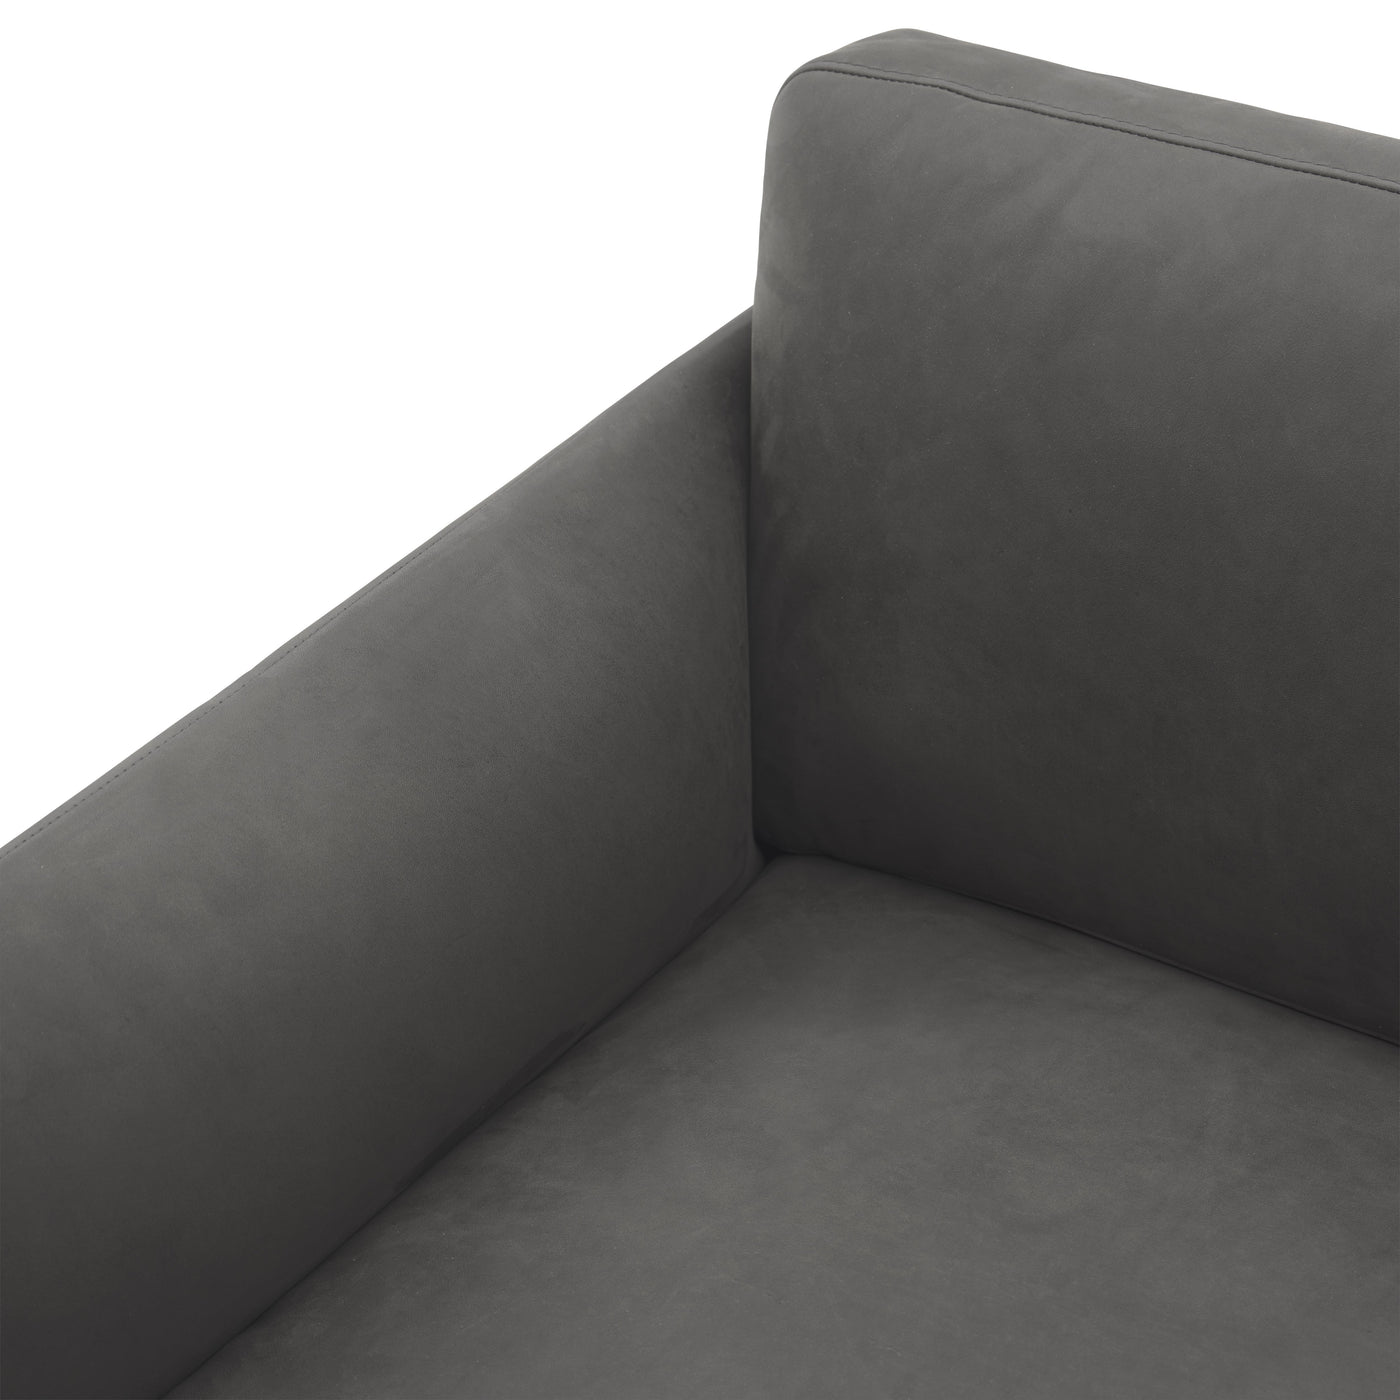 Muuto Outline Studio Sofa. Made to order from someday designs. #colour_grey-grace-leather